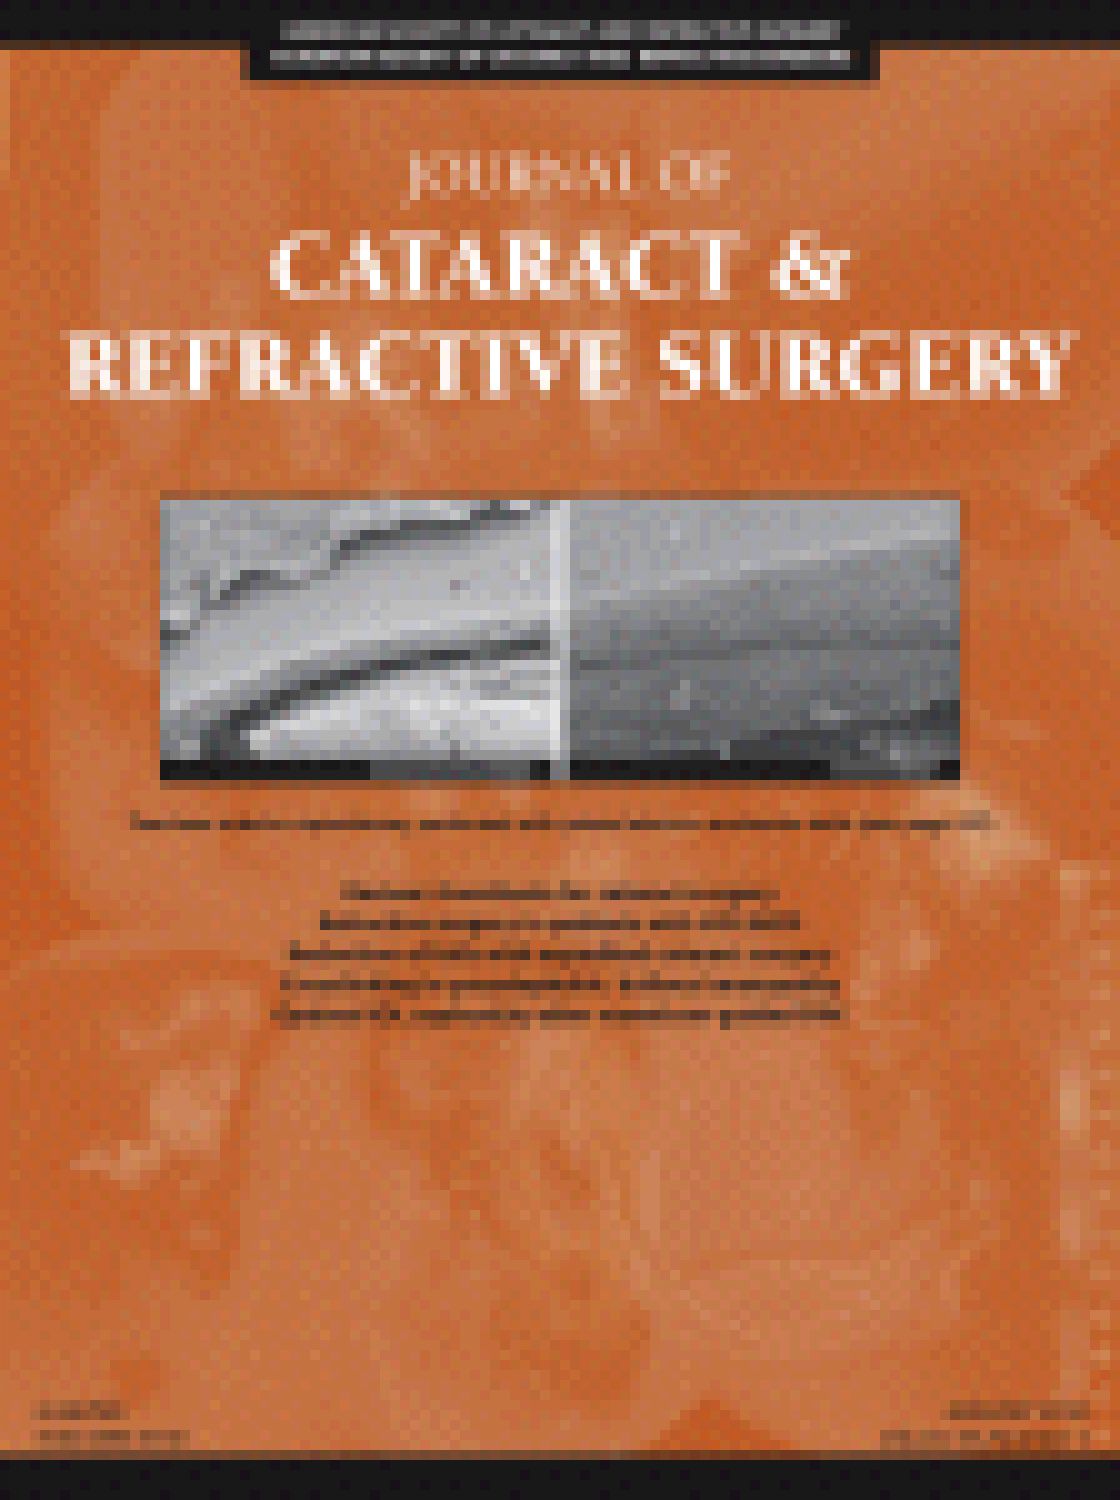 Clinical relevance of radius of curvature error in corneal power measurements after excimer laser surgery